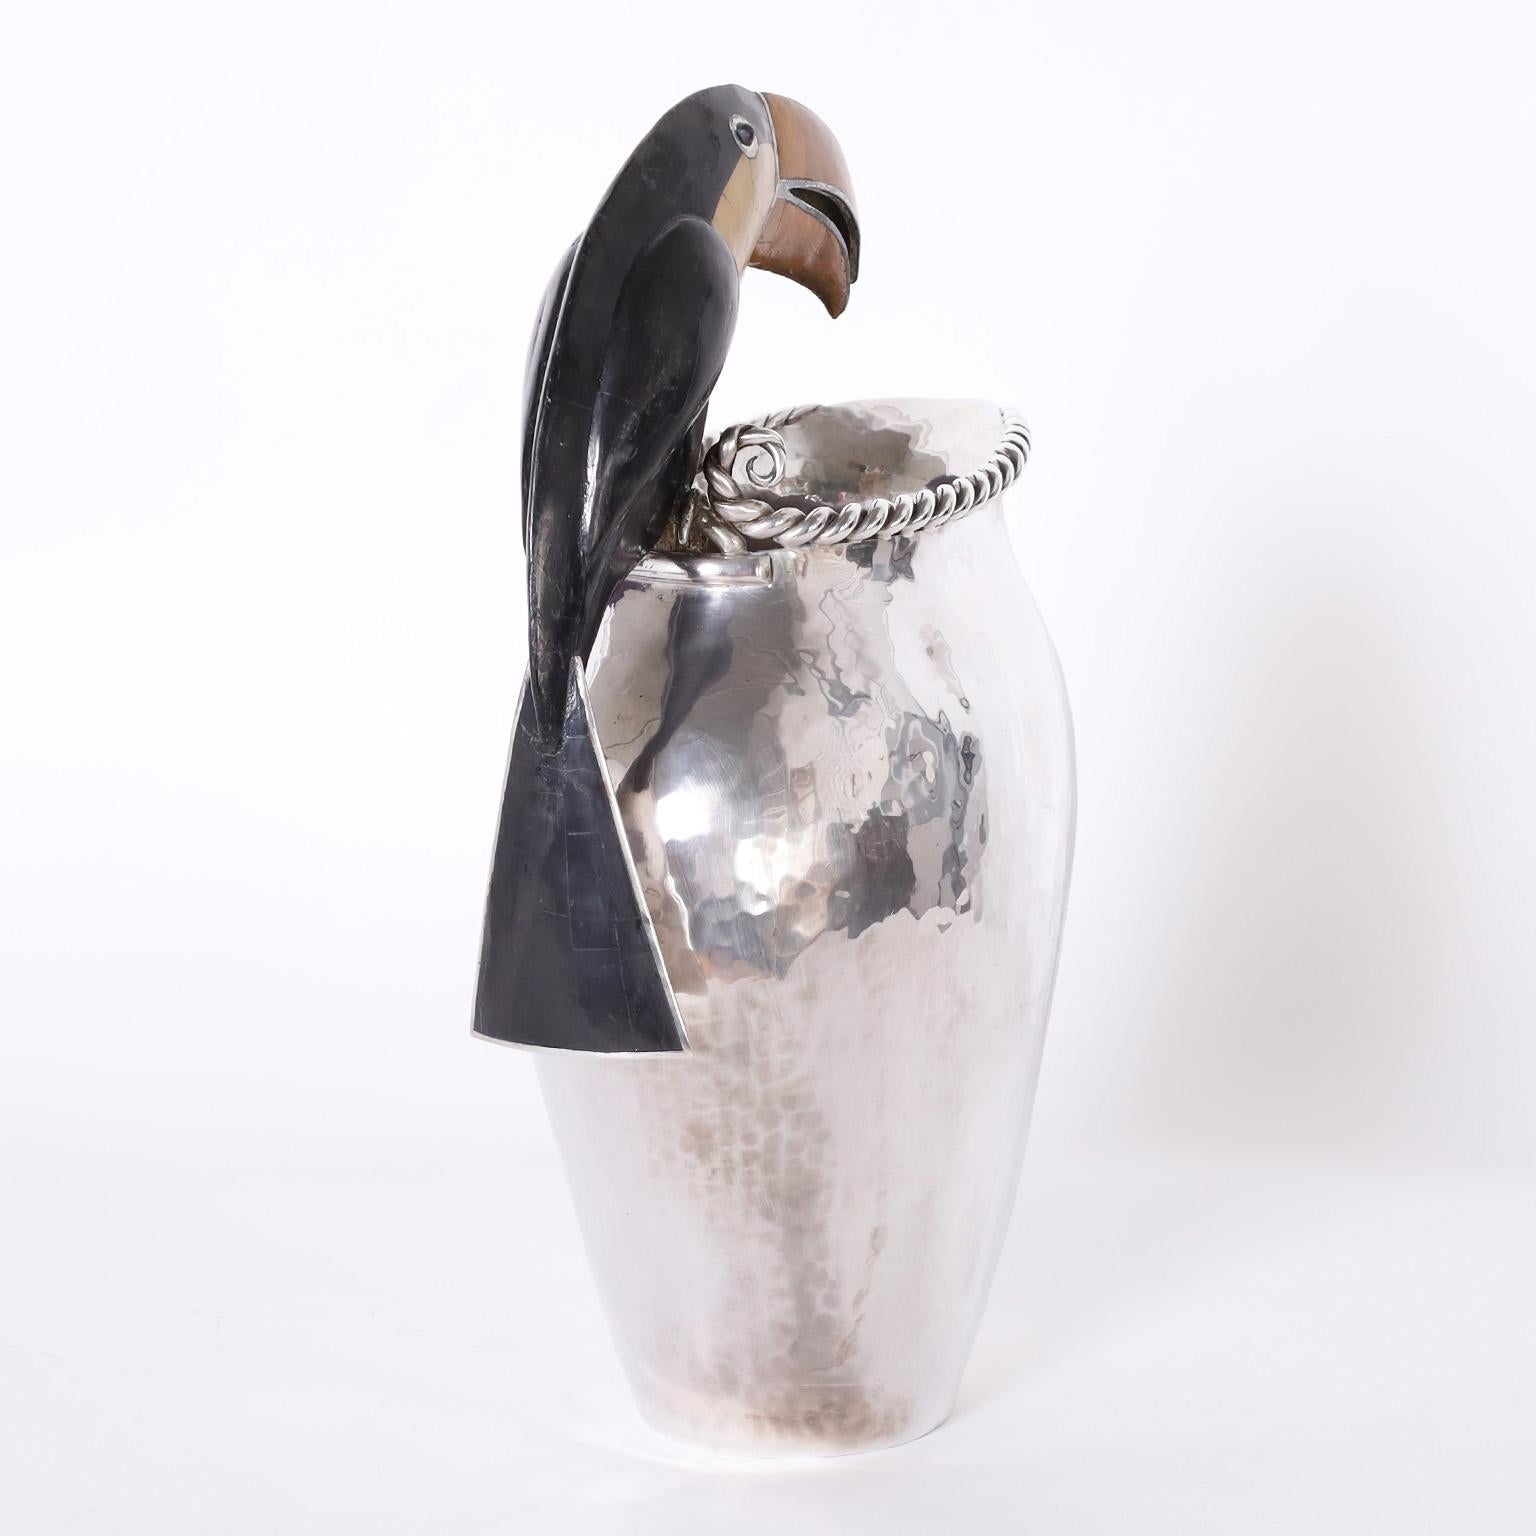 Mexican Silver Plate on Copper Pitcher with Toucan by Emilia Castillo